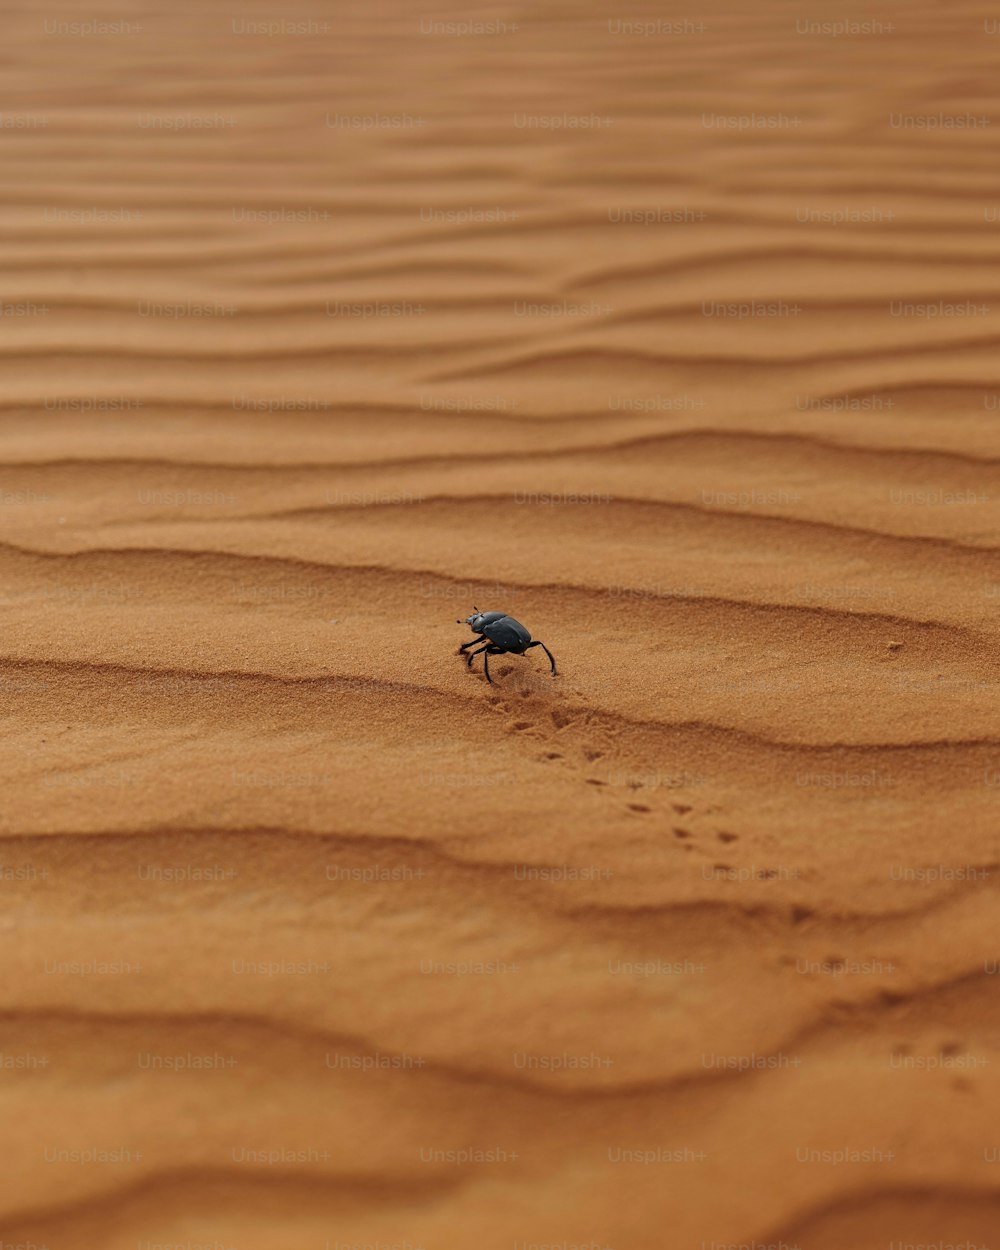 a bug crawling across a sandy area in the desert